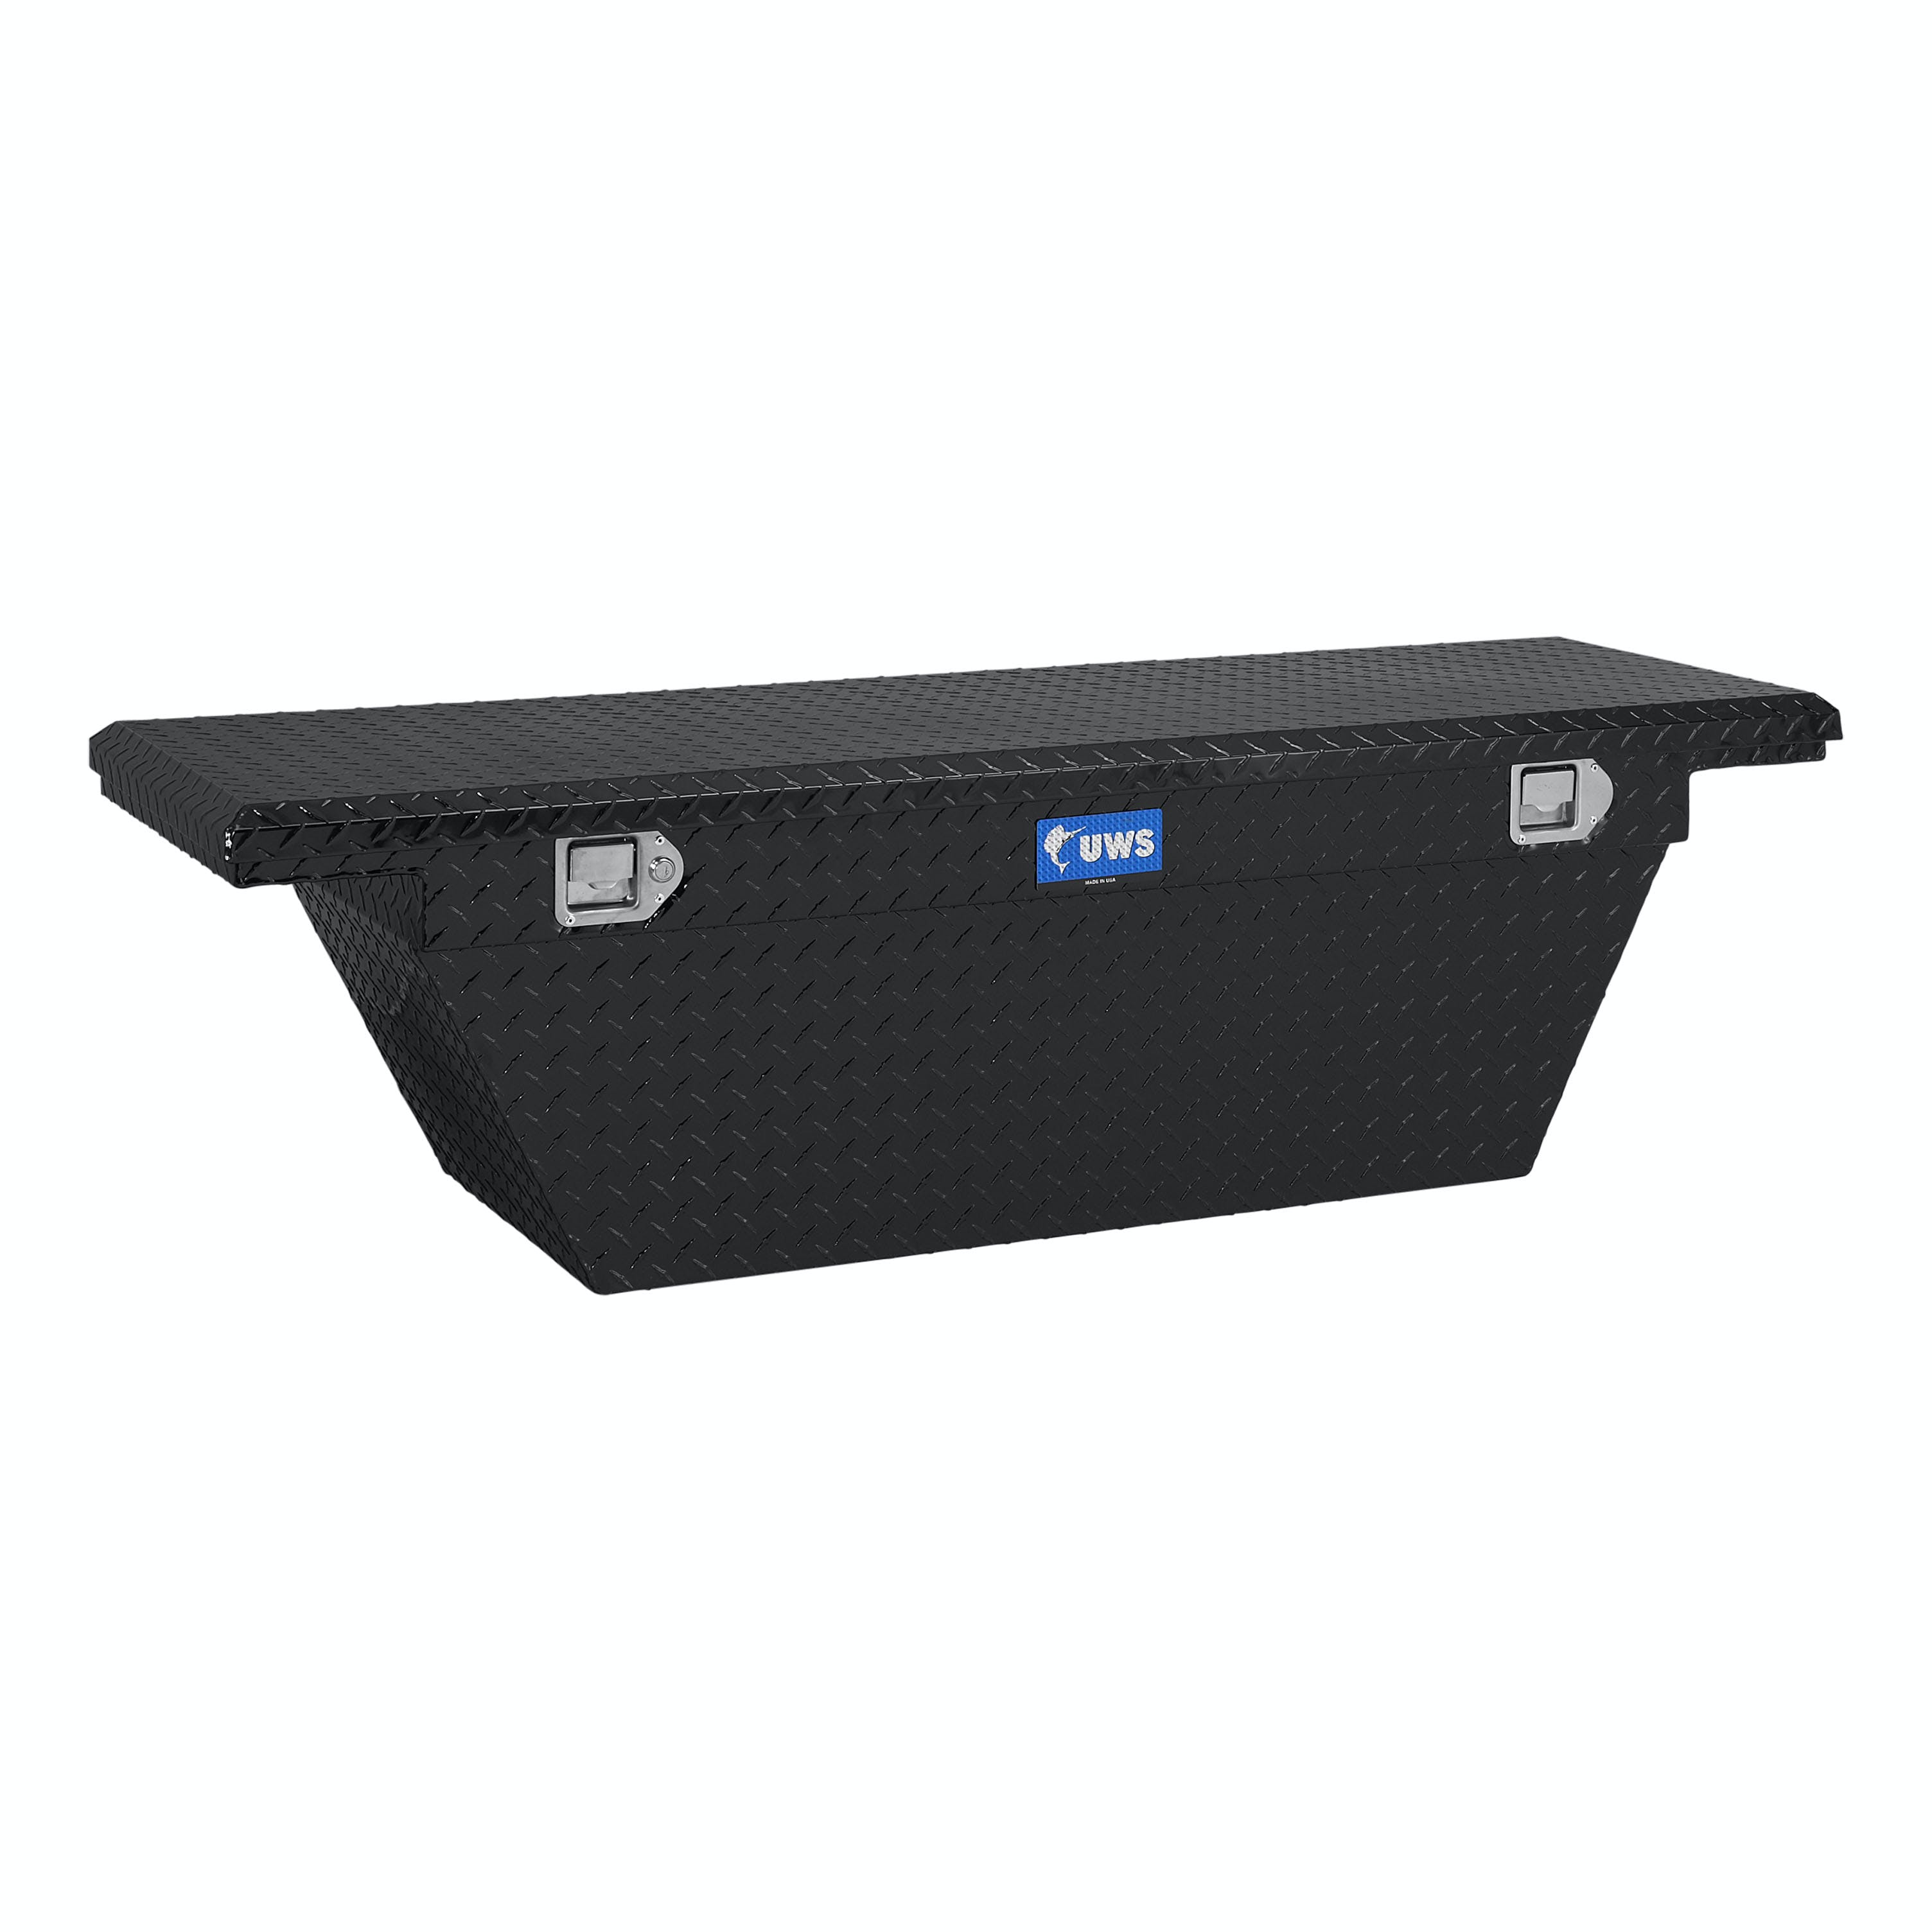 UWS TBSD-63A-LP-BLK 63 inch Aluminum Single Lid Crossover Toolbox Deep Angled Low Profile Black